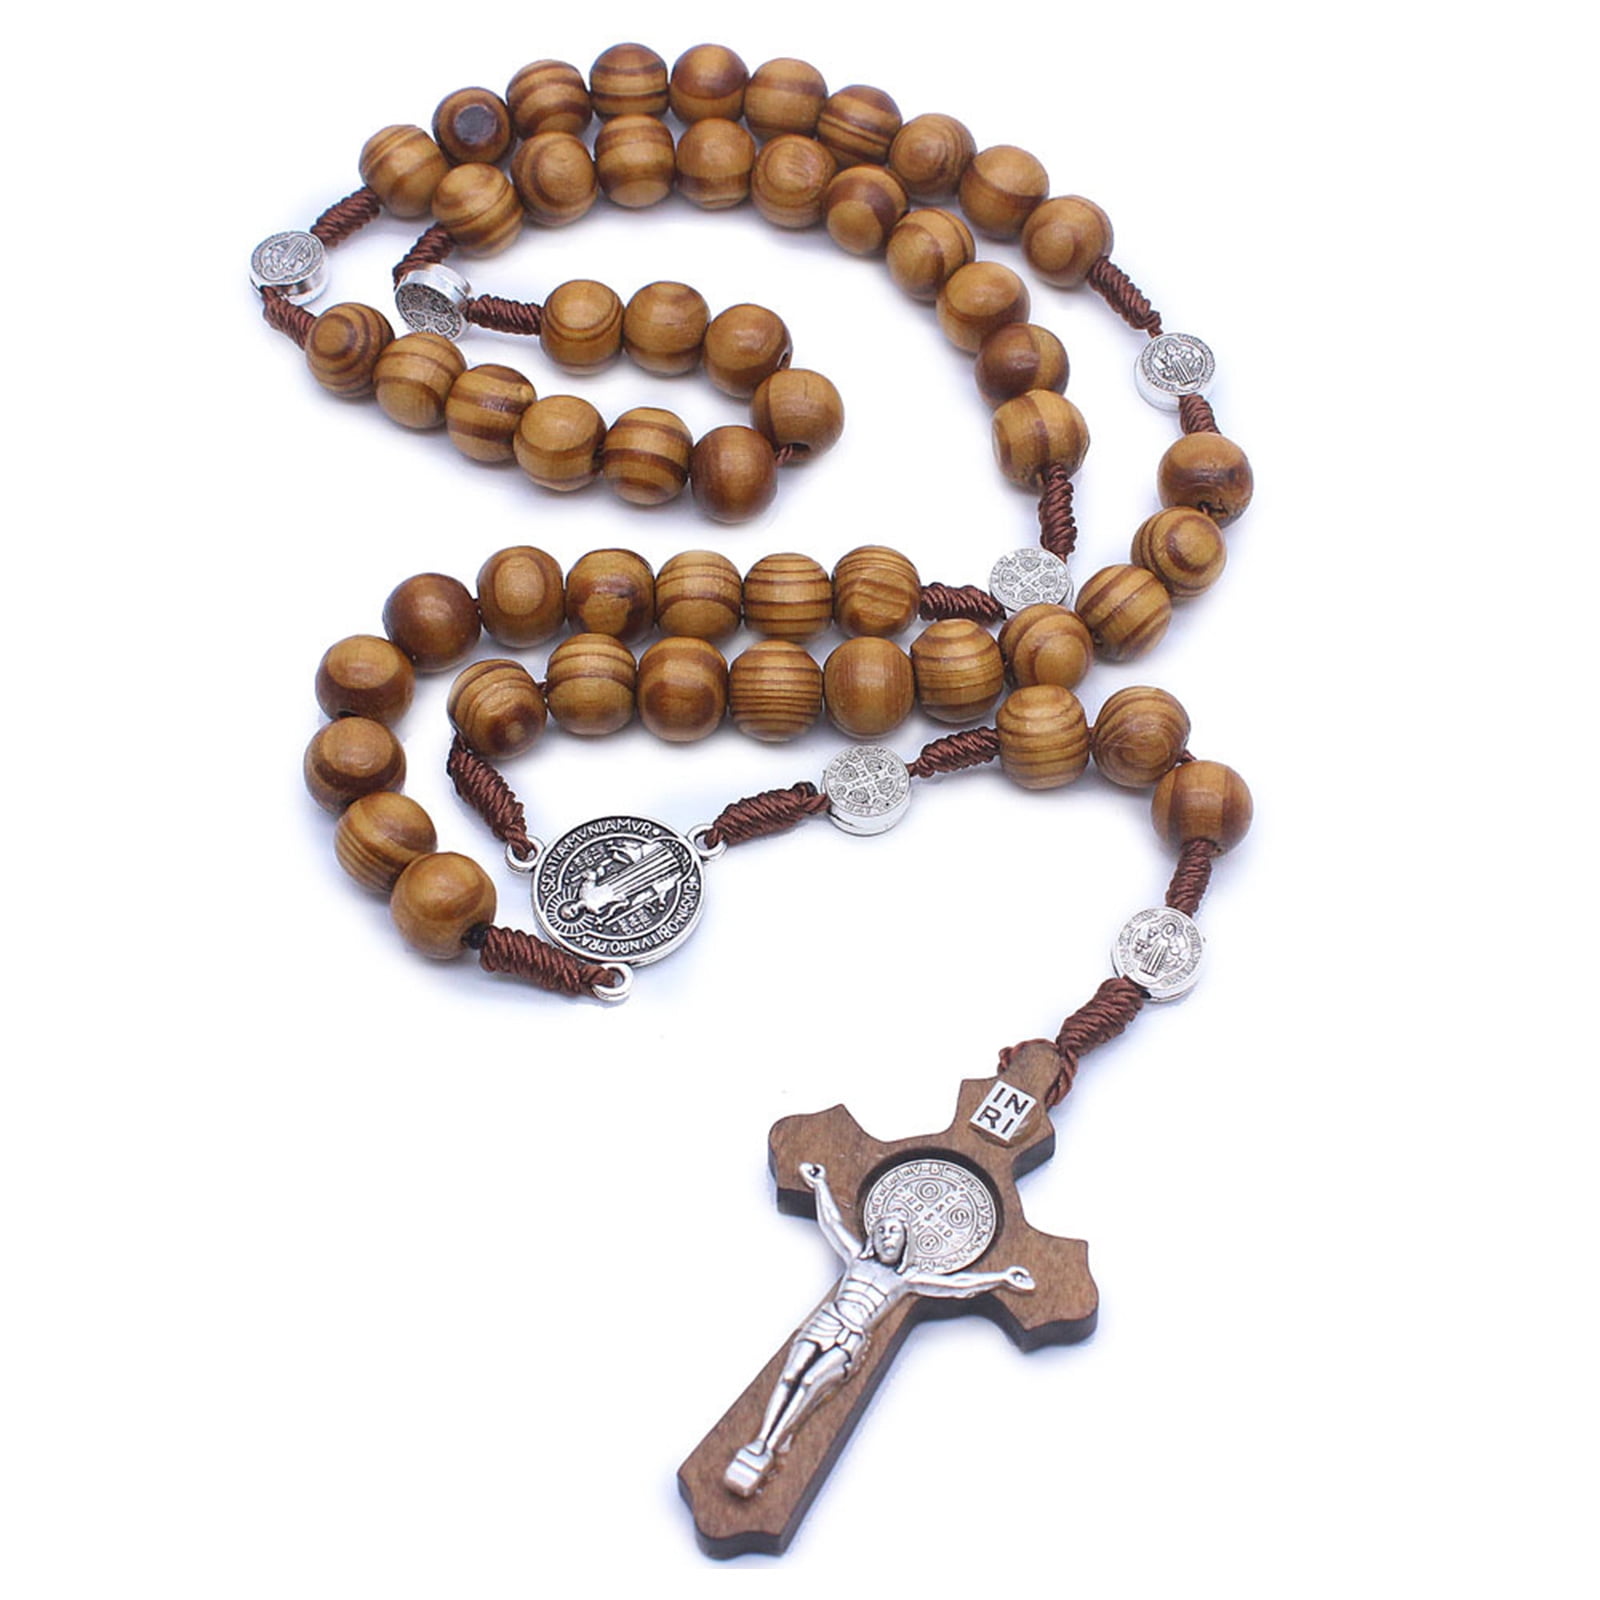 Wholesale PH PandaHall 359pcs Cross Charms Rosary Jewelry Making Wood Beads  Rosaries Tibetan Pendant and Spacer Beads for Easter Eid Mubarak Ramadan  Necklace Bracelet Earrings Rosary Making Bead Supplies 